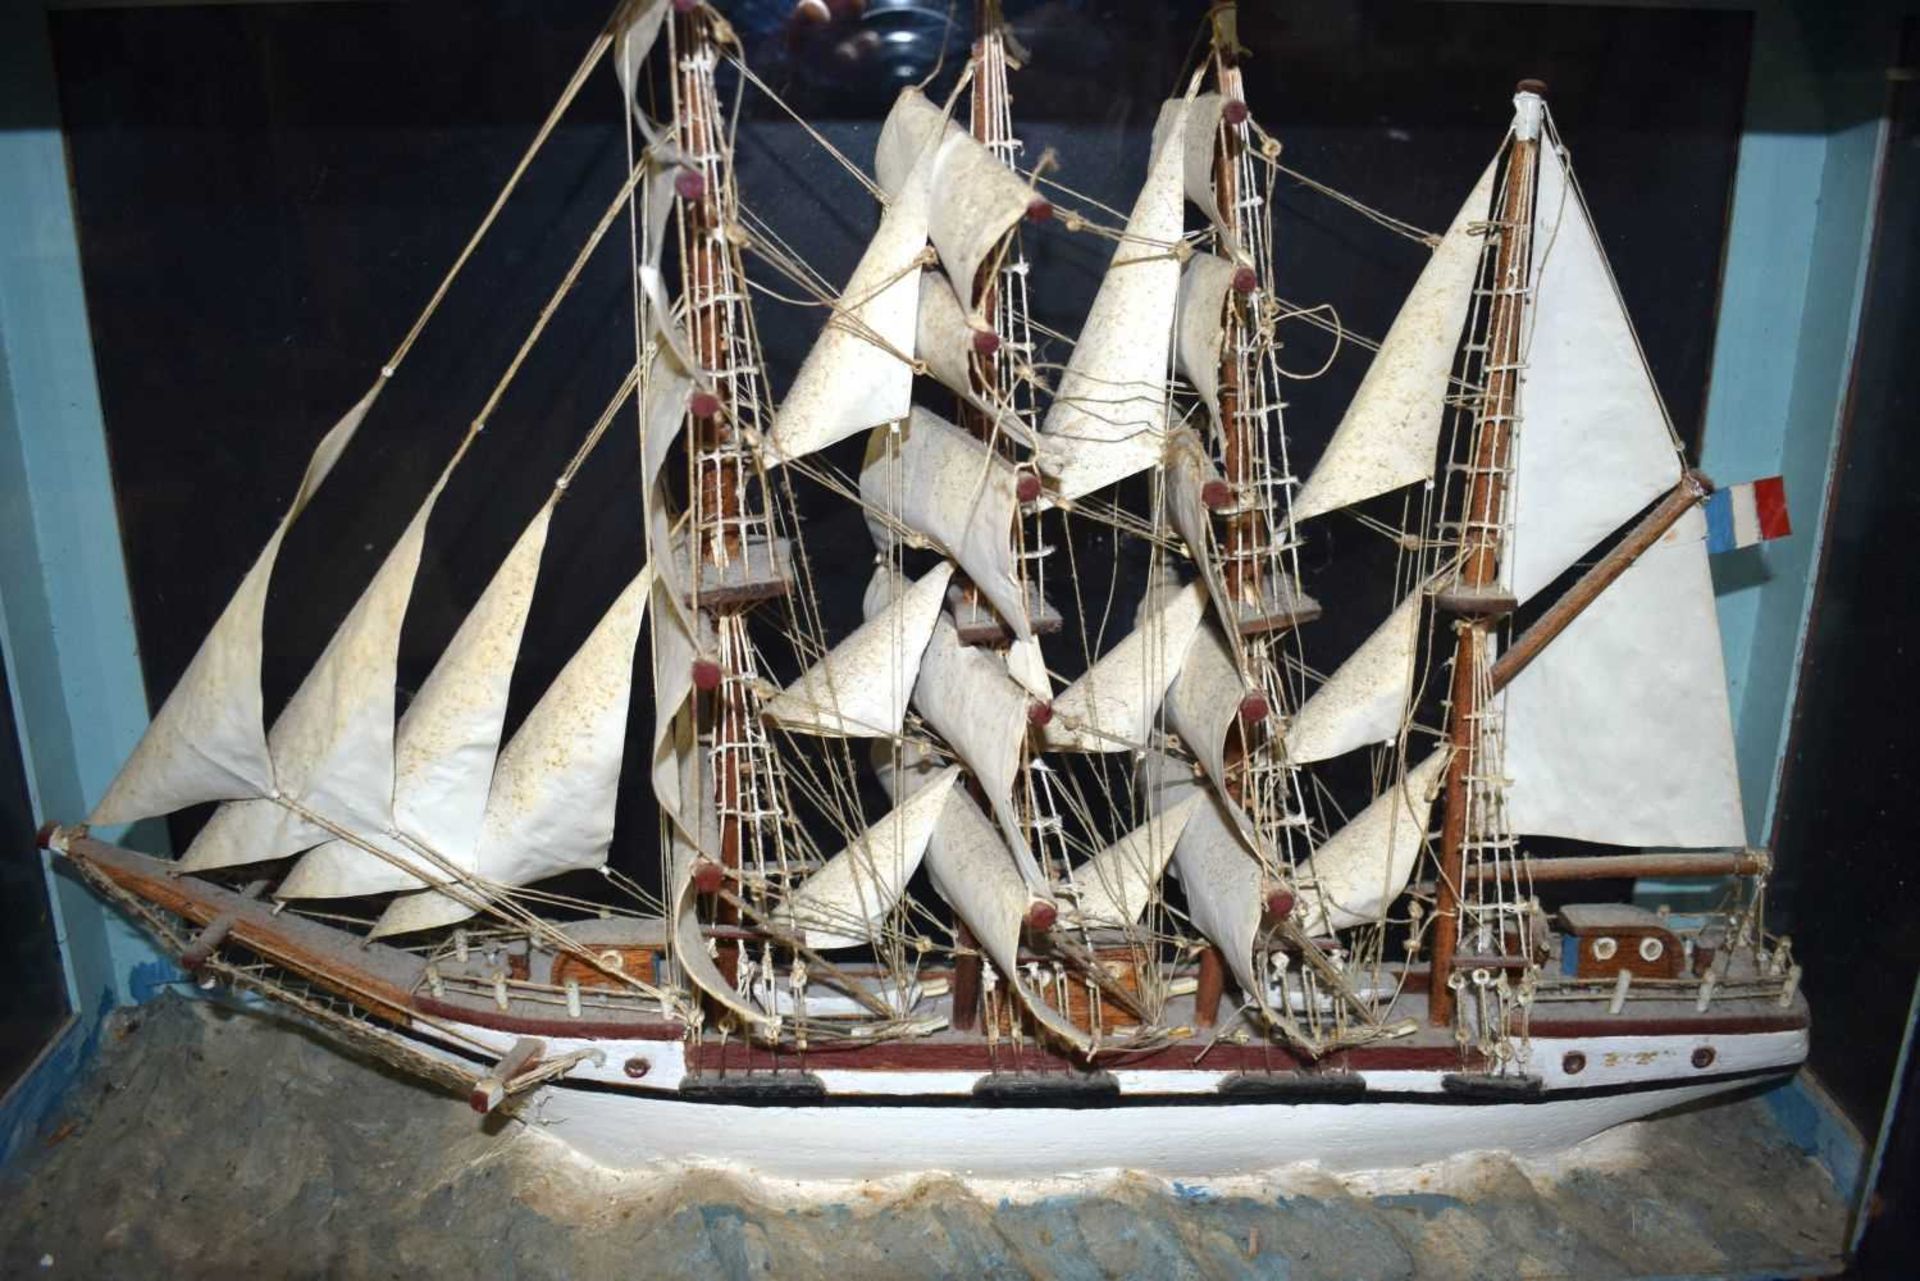 A glass cased model of a 19th Century 3 masted French sailing ship "Bretagne" 35 x 53 x 16 cm. - Image 2 of 4